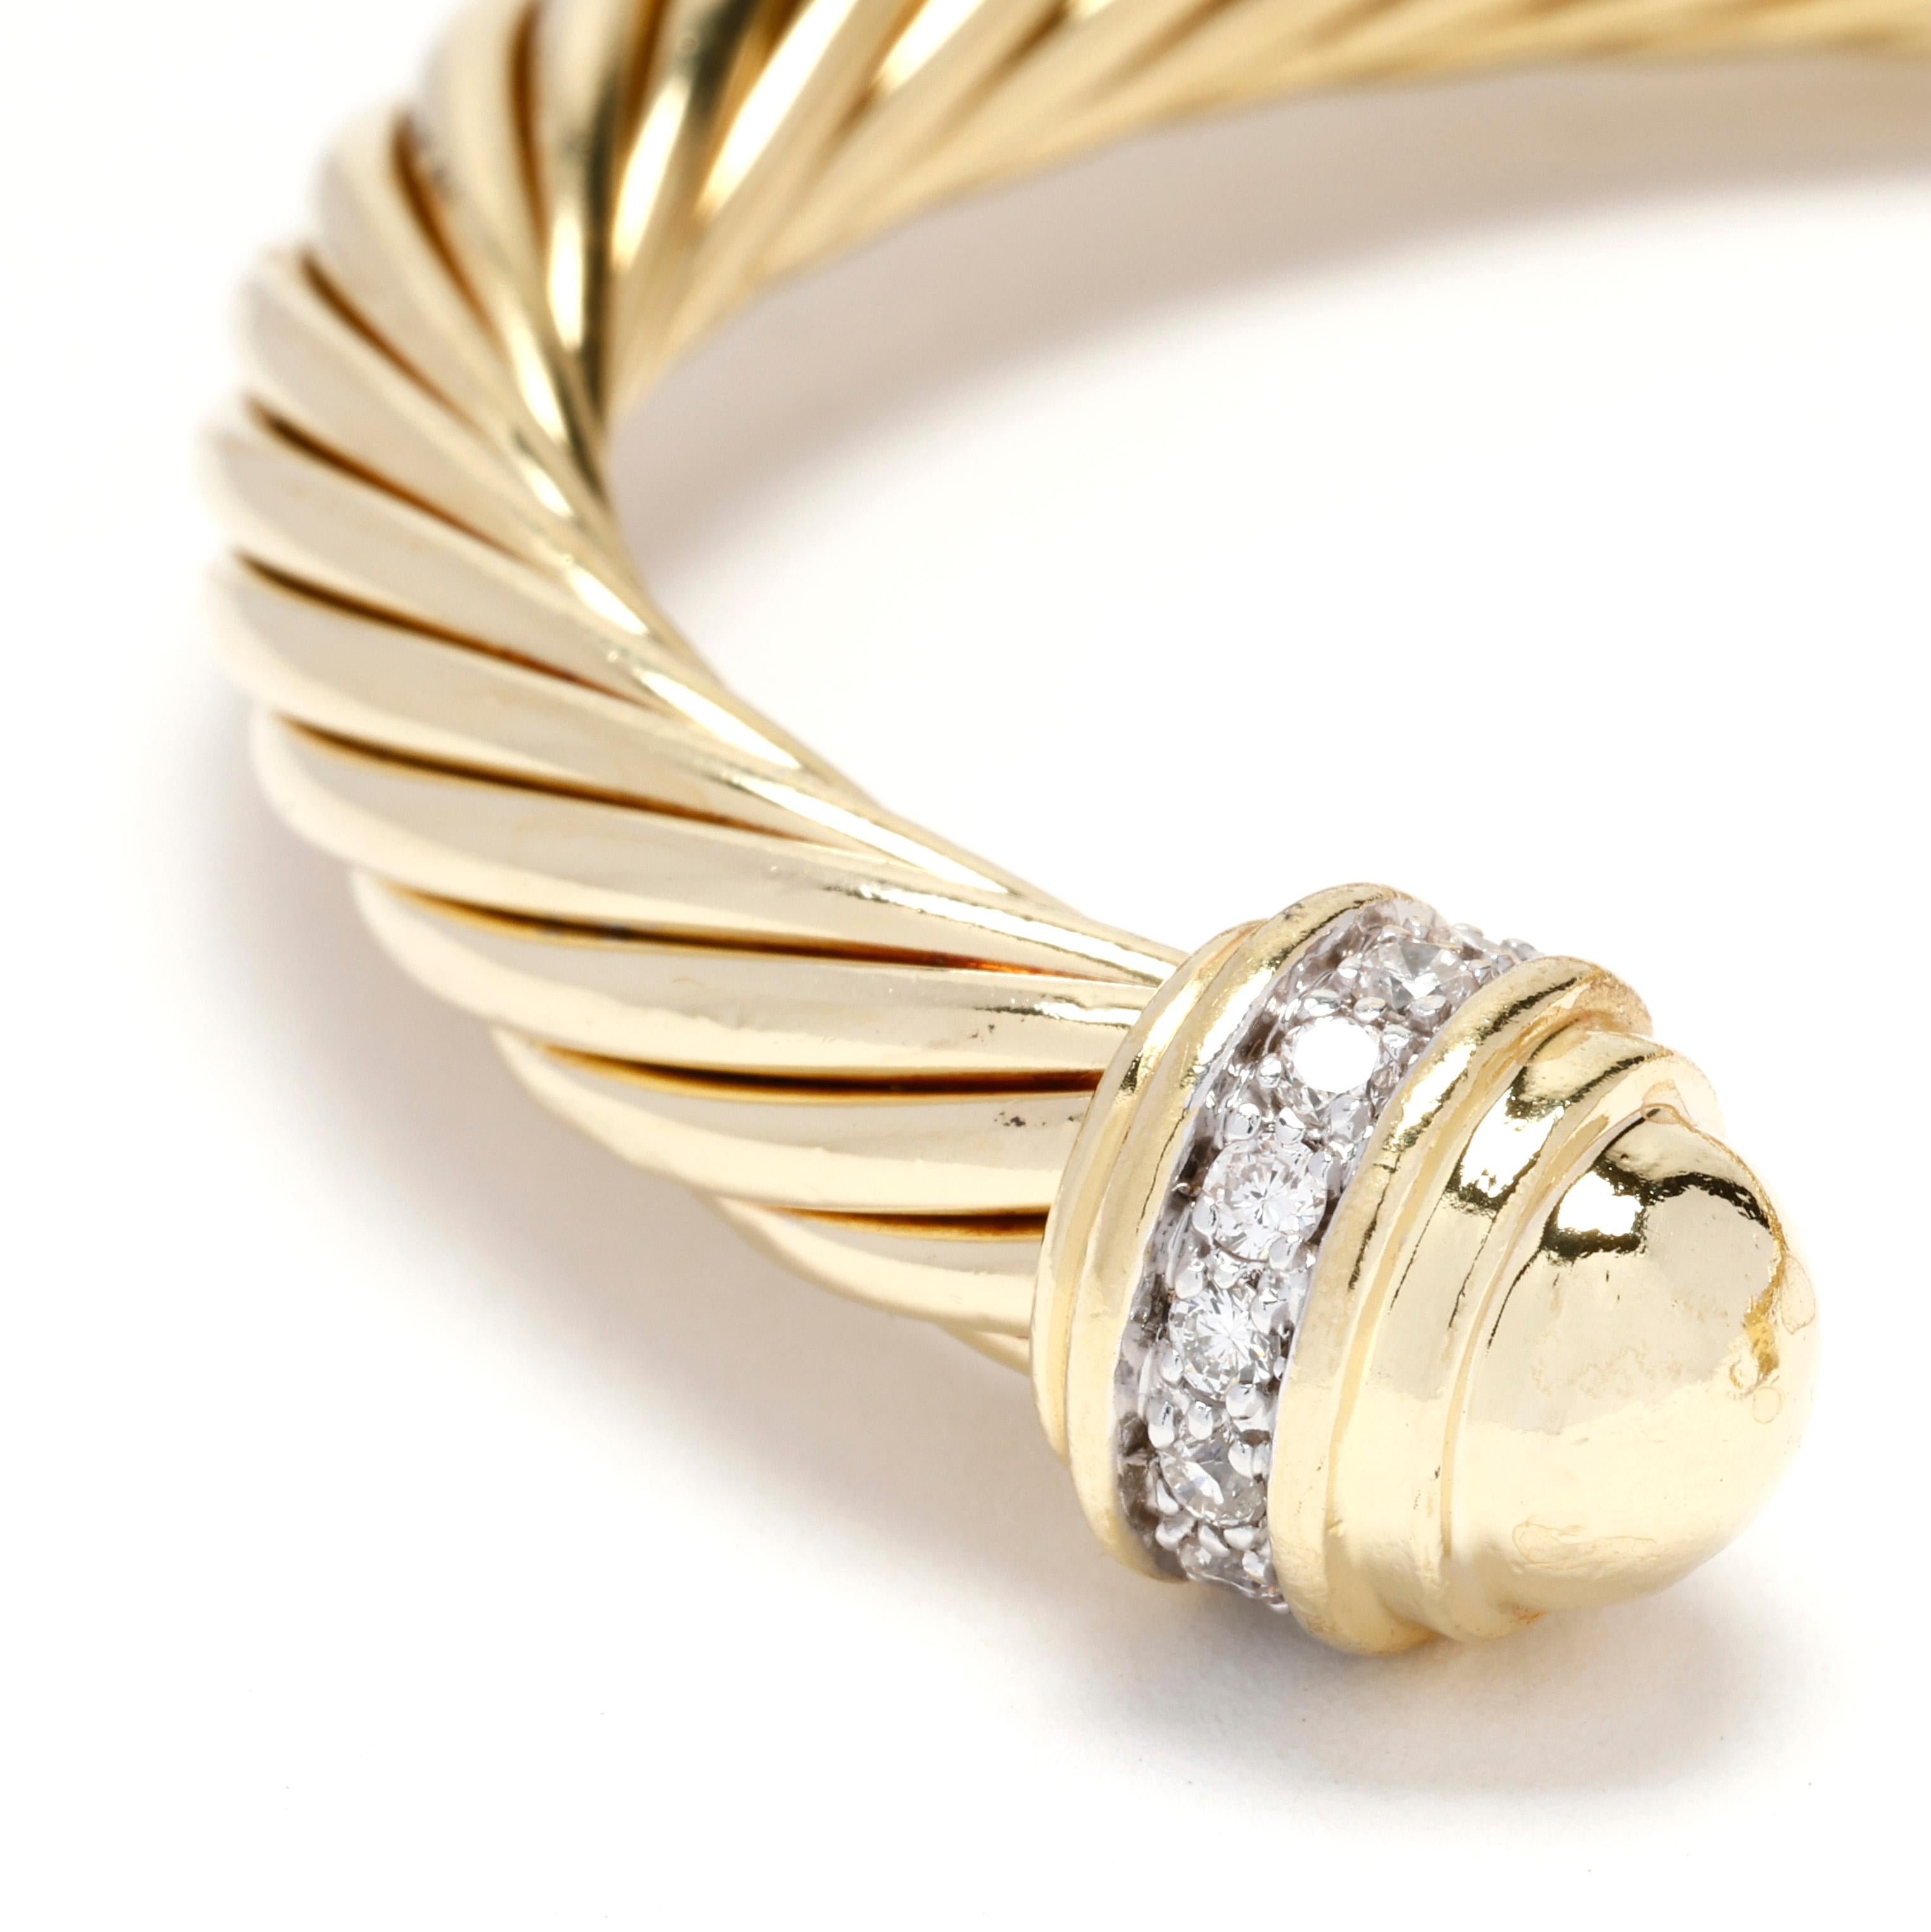 Indulge in the timeless elegance and distinctive design of David Yurman with this exquisite .40ctw Diamond and Gold Twisted Cuff Bracelet. Expertly crafted in luxurious 18k yellow gold, this stunning cuff bracelet features David Yurman's signature